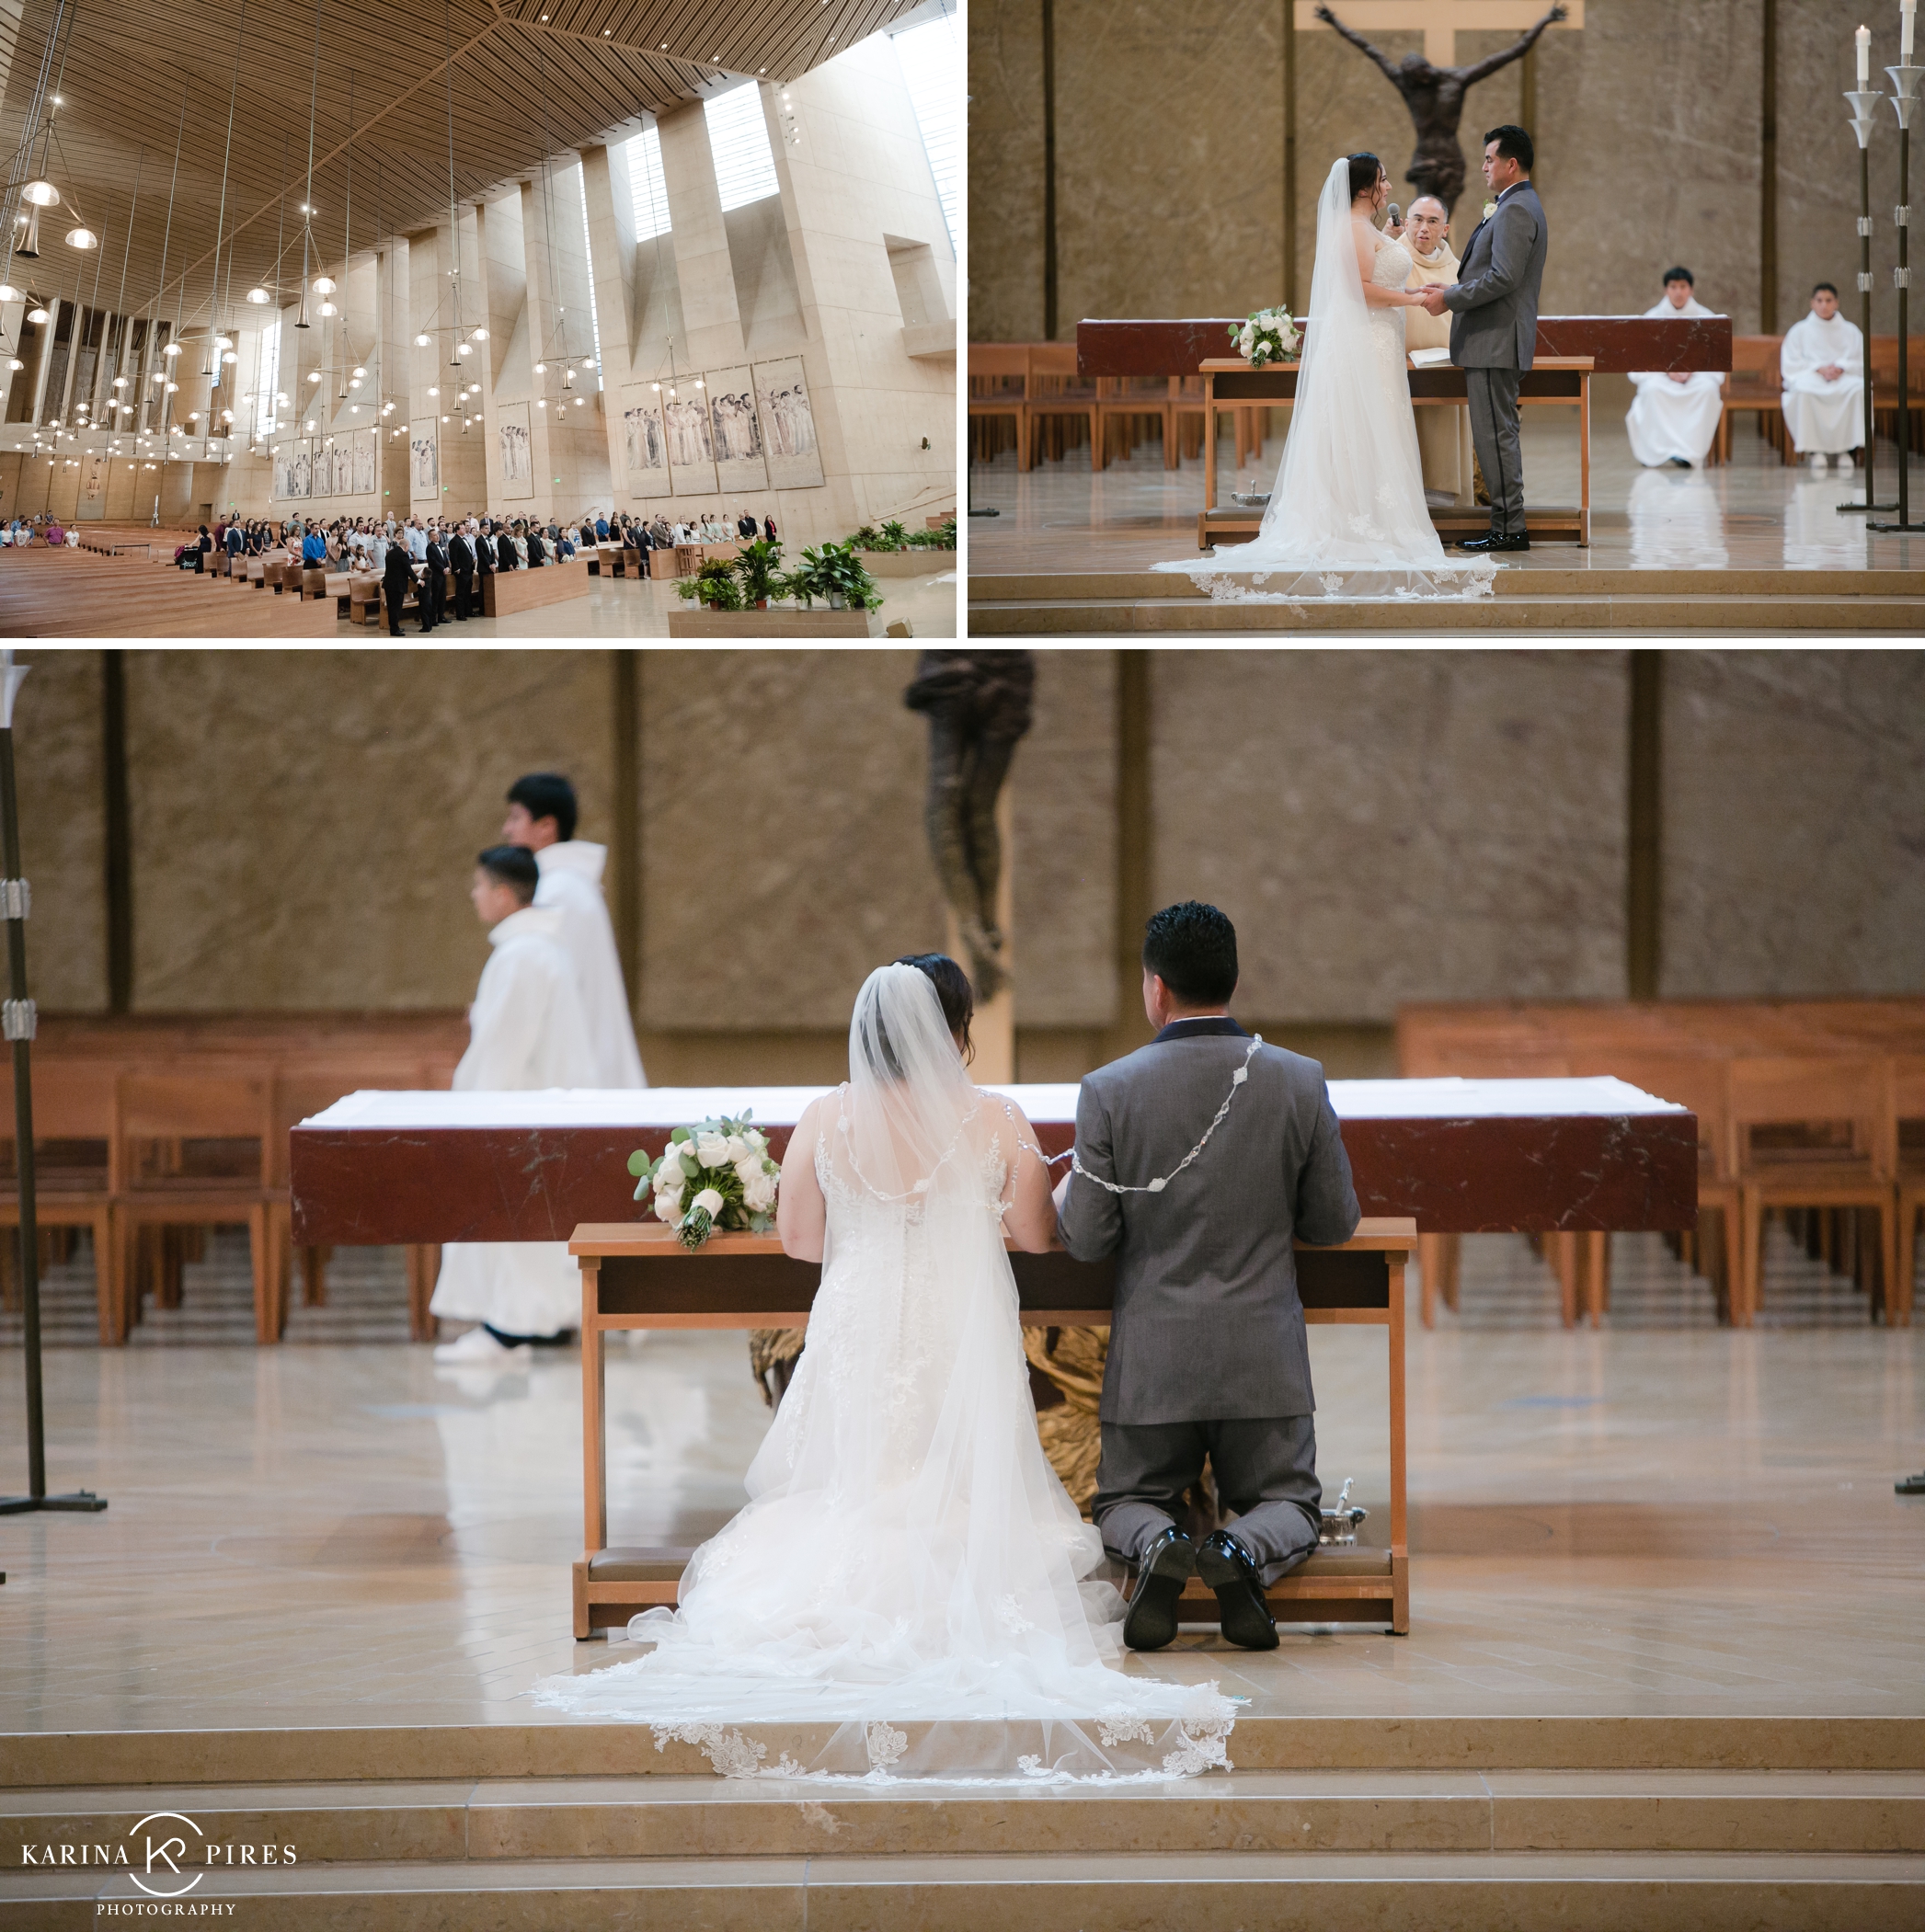 Jennifer and Ronaldo’s wedding ceremony at the Cathedral of Our Lady of the Angels